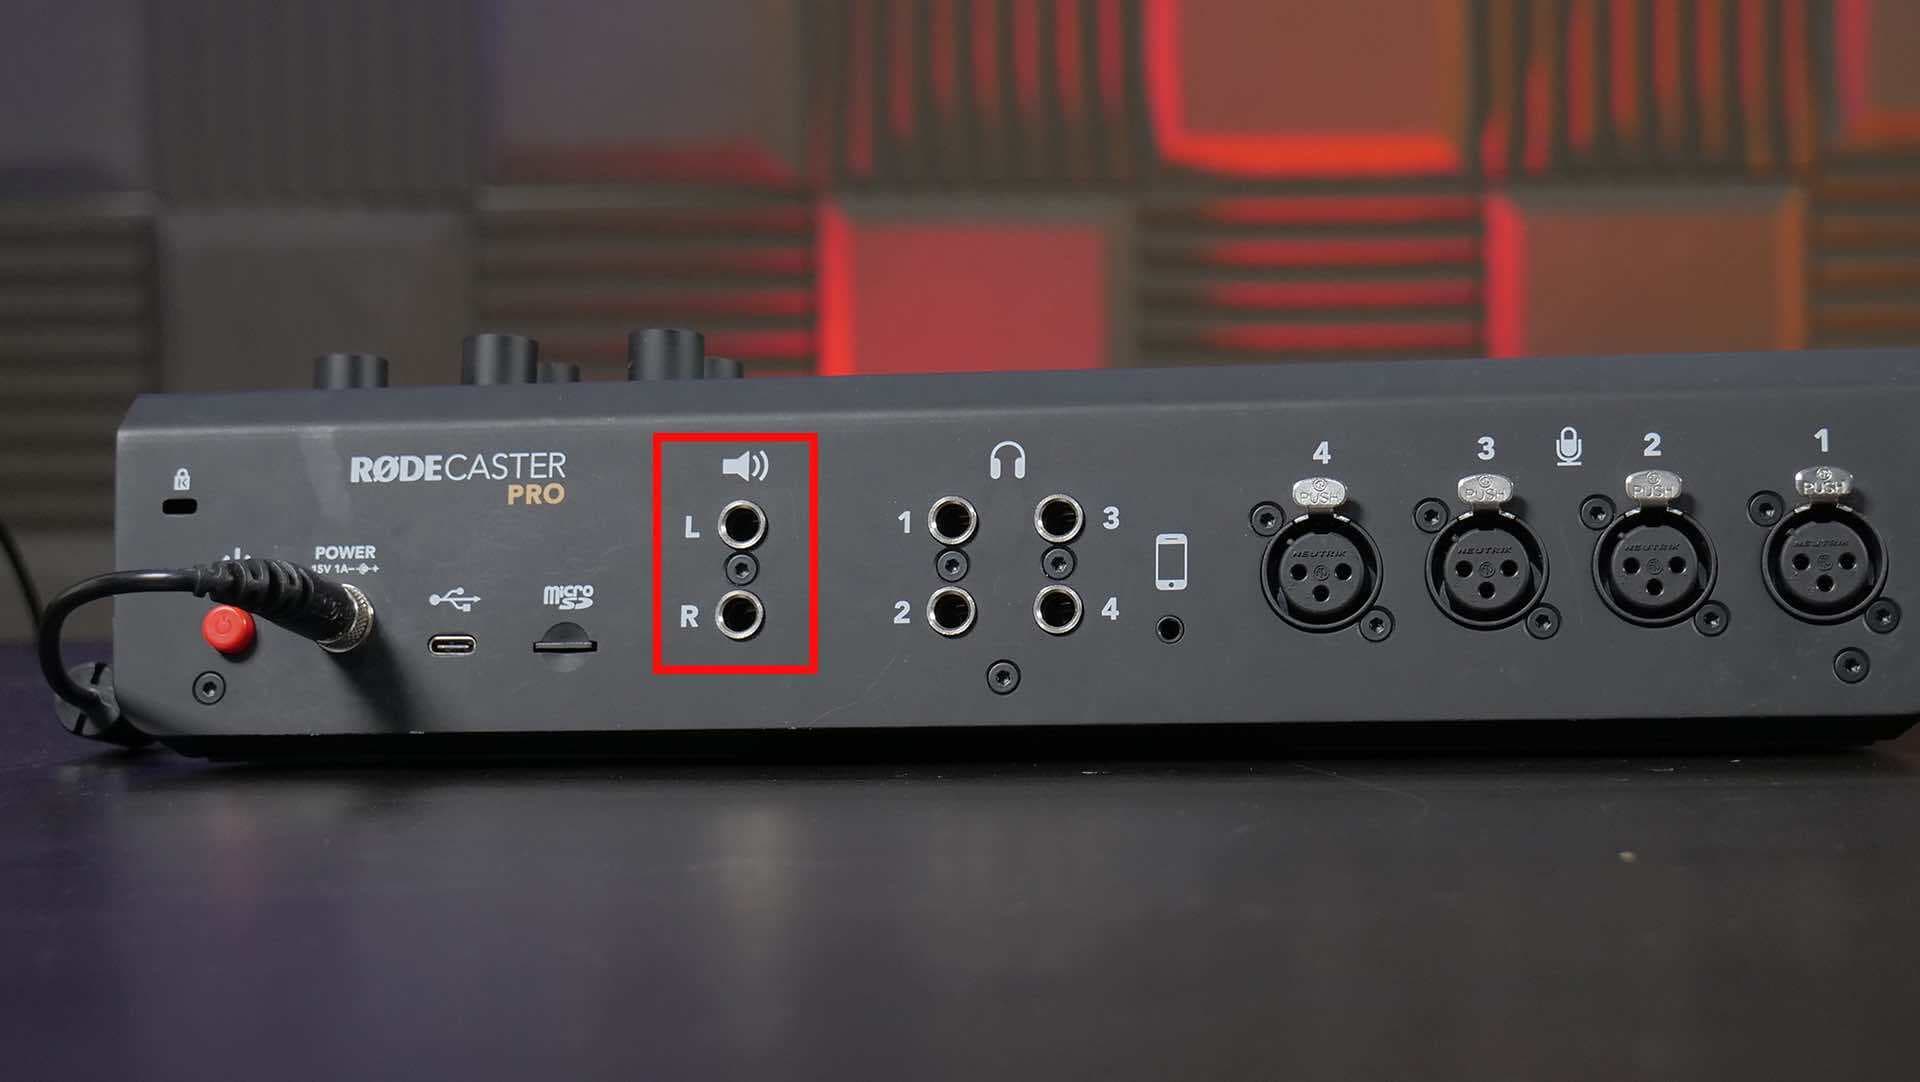 How to Broadcast Live Radio with the Rodecaster Pro Speaker Outputs